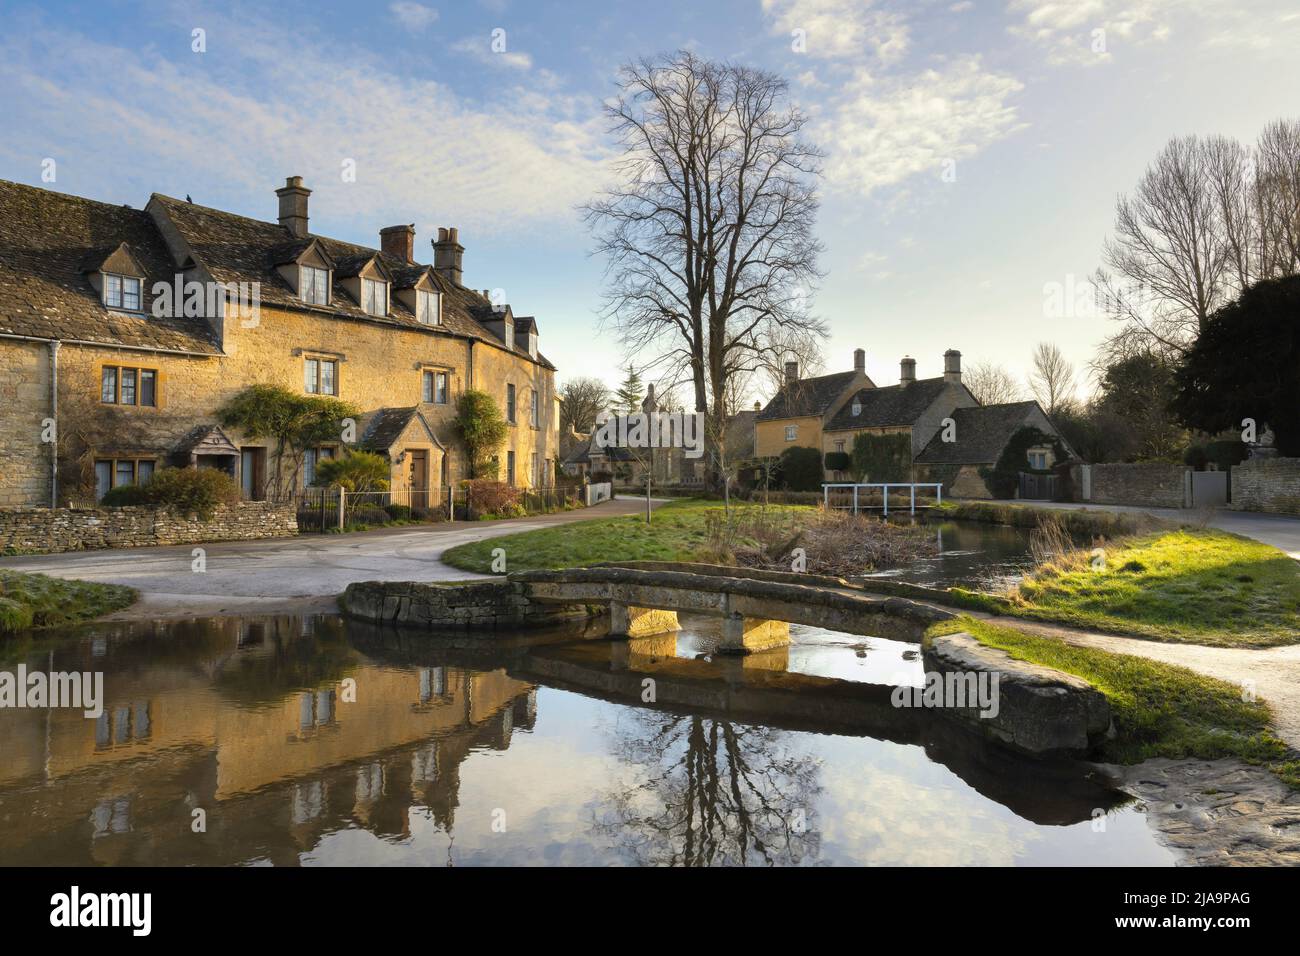 Lower Slaughter, Cotswolds, Gloucestershire, England. Stock Photo